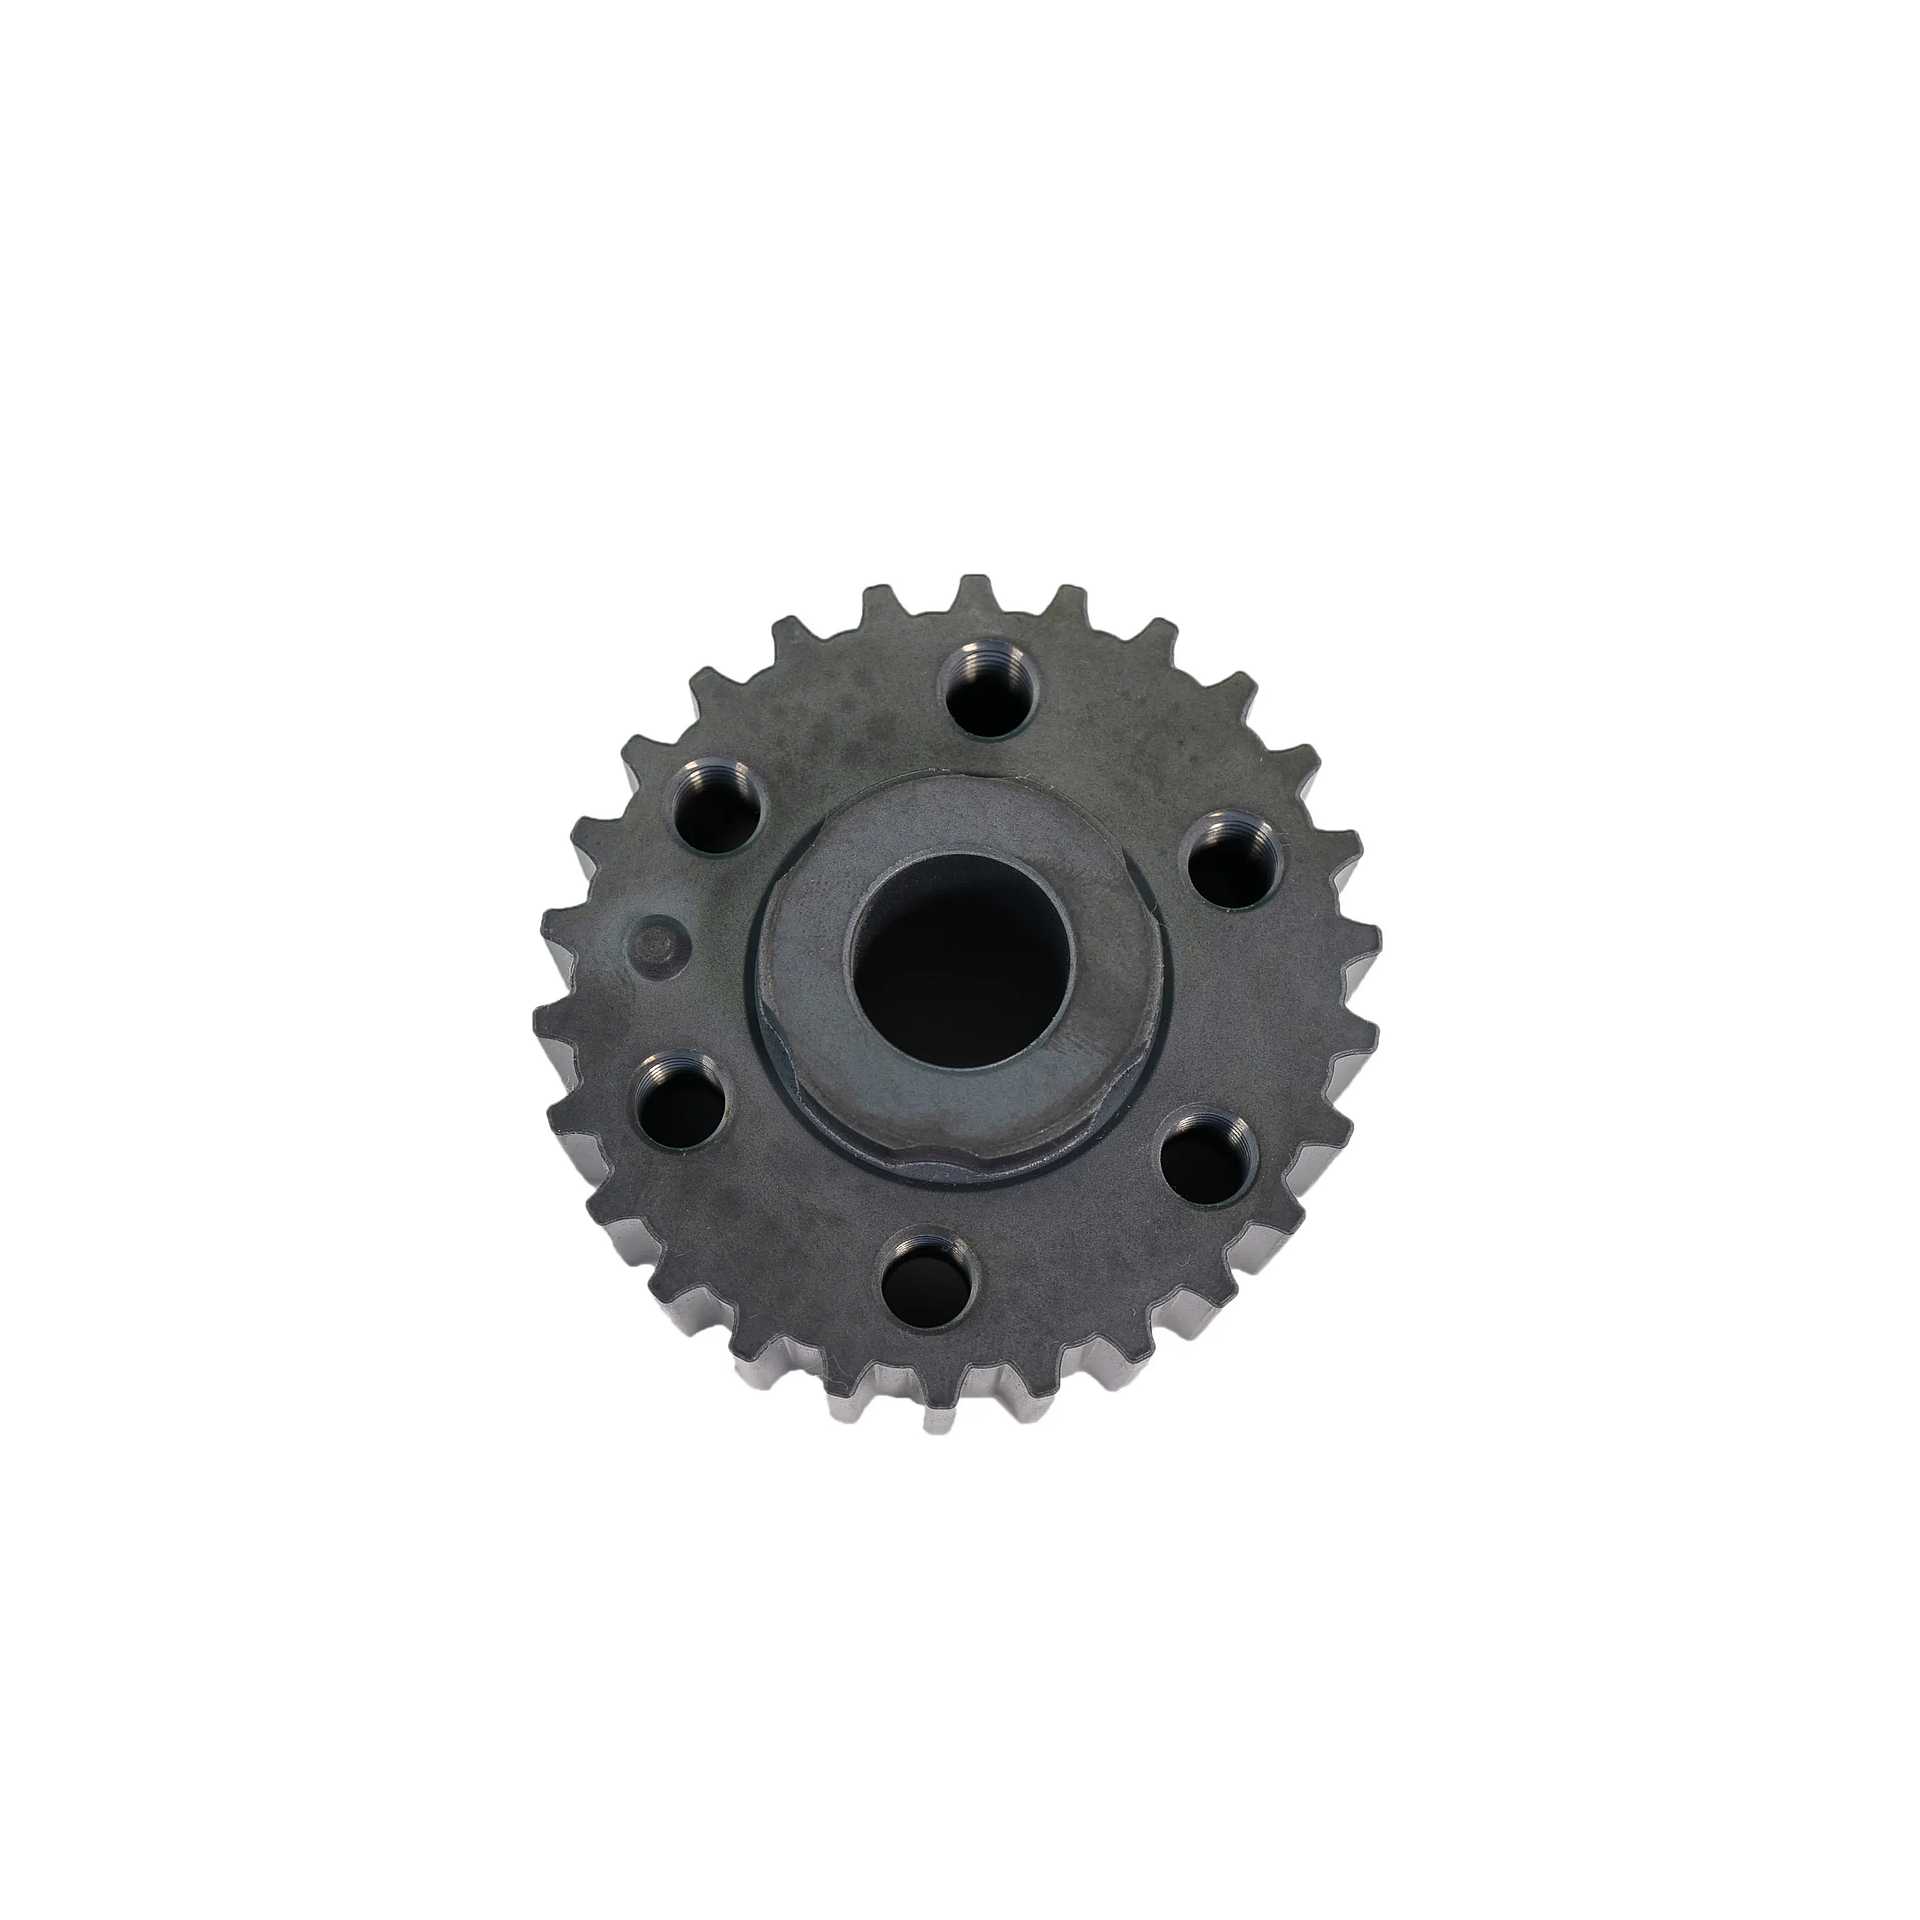 BAR-TEK® Replacement gear wheel for pulley Fits VAG 2.0L TFSI & TSI